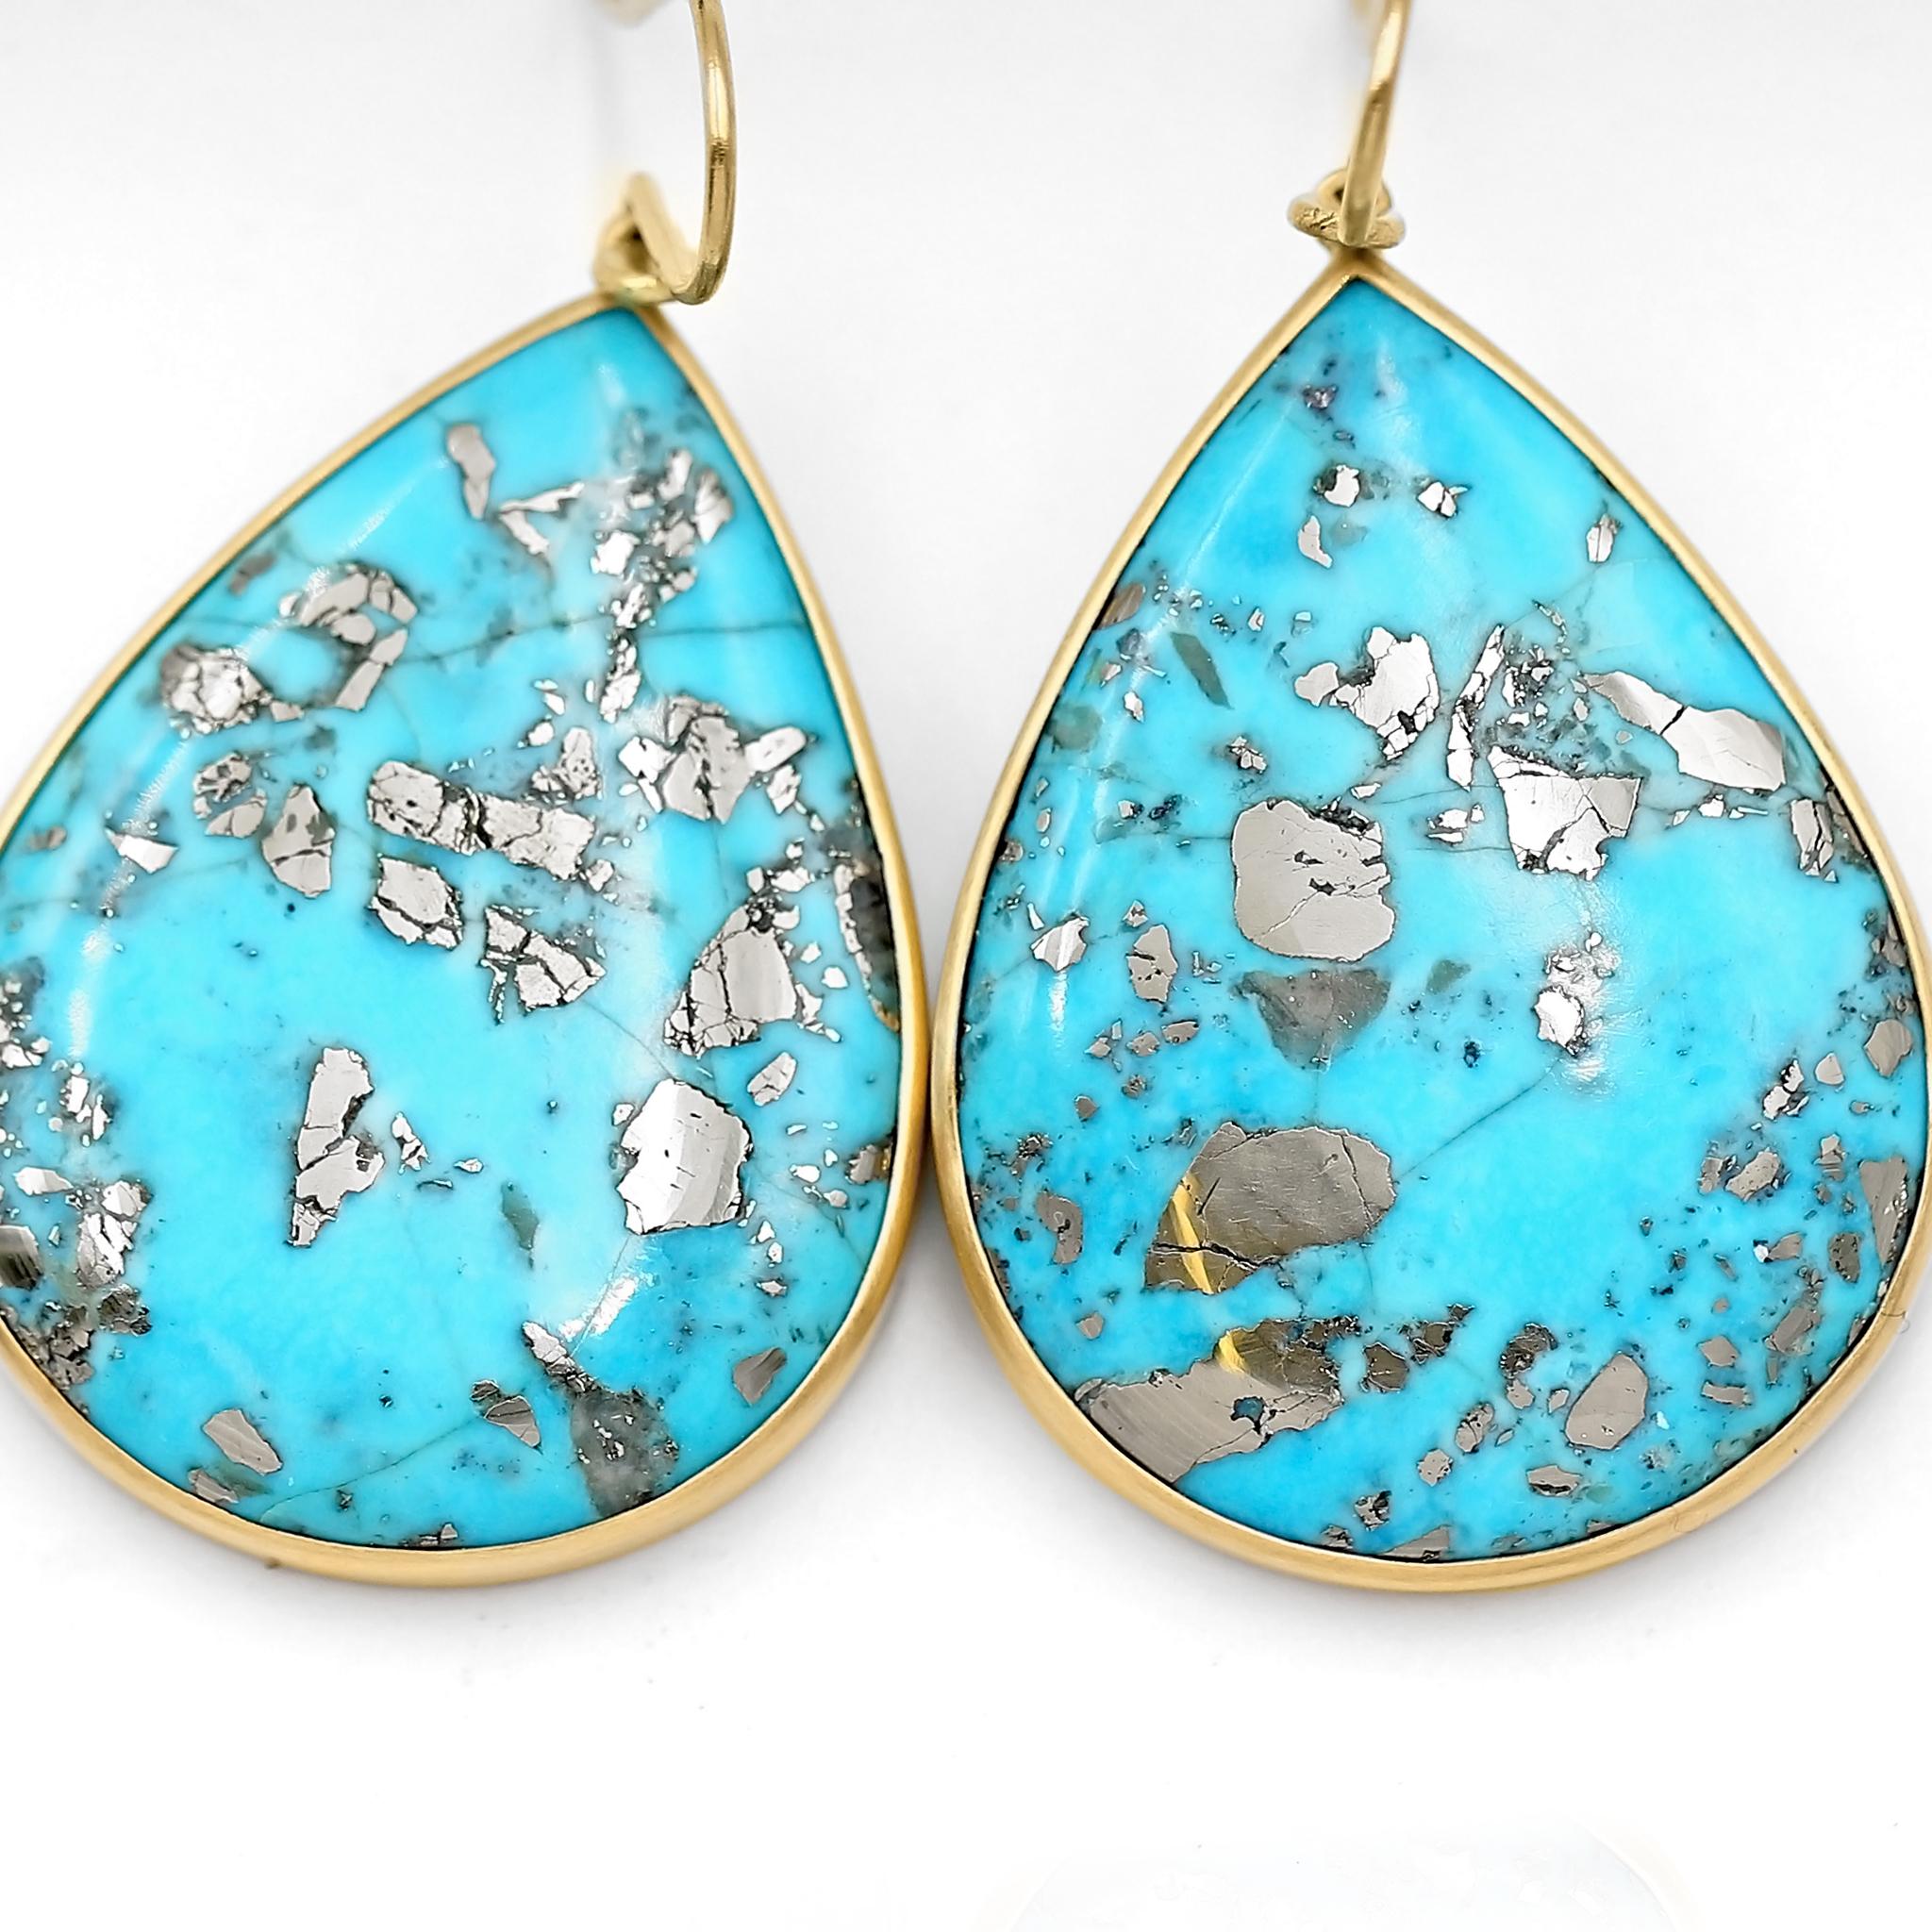 One of a Kind Earrings hand-fabricated by jewelry maker Lola Brooks showcasing a matched pair of top quality natural turquoise cabochon drops totaling 64.68 carats, and featuring a shimmering metallic iron pyrite matrix atop a vibrant blue backdrop.